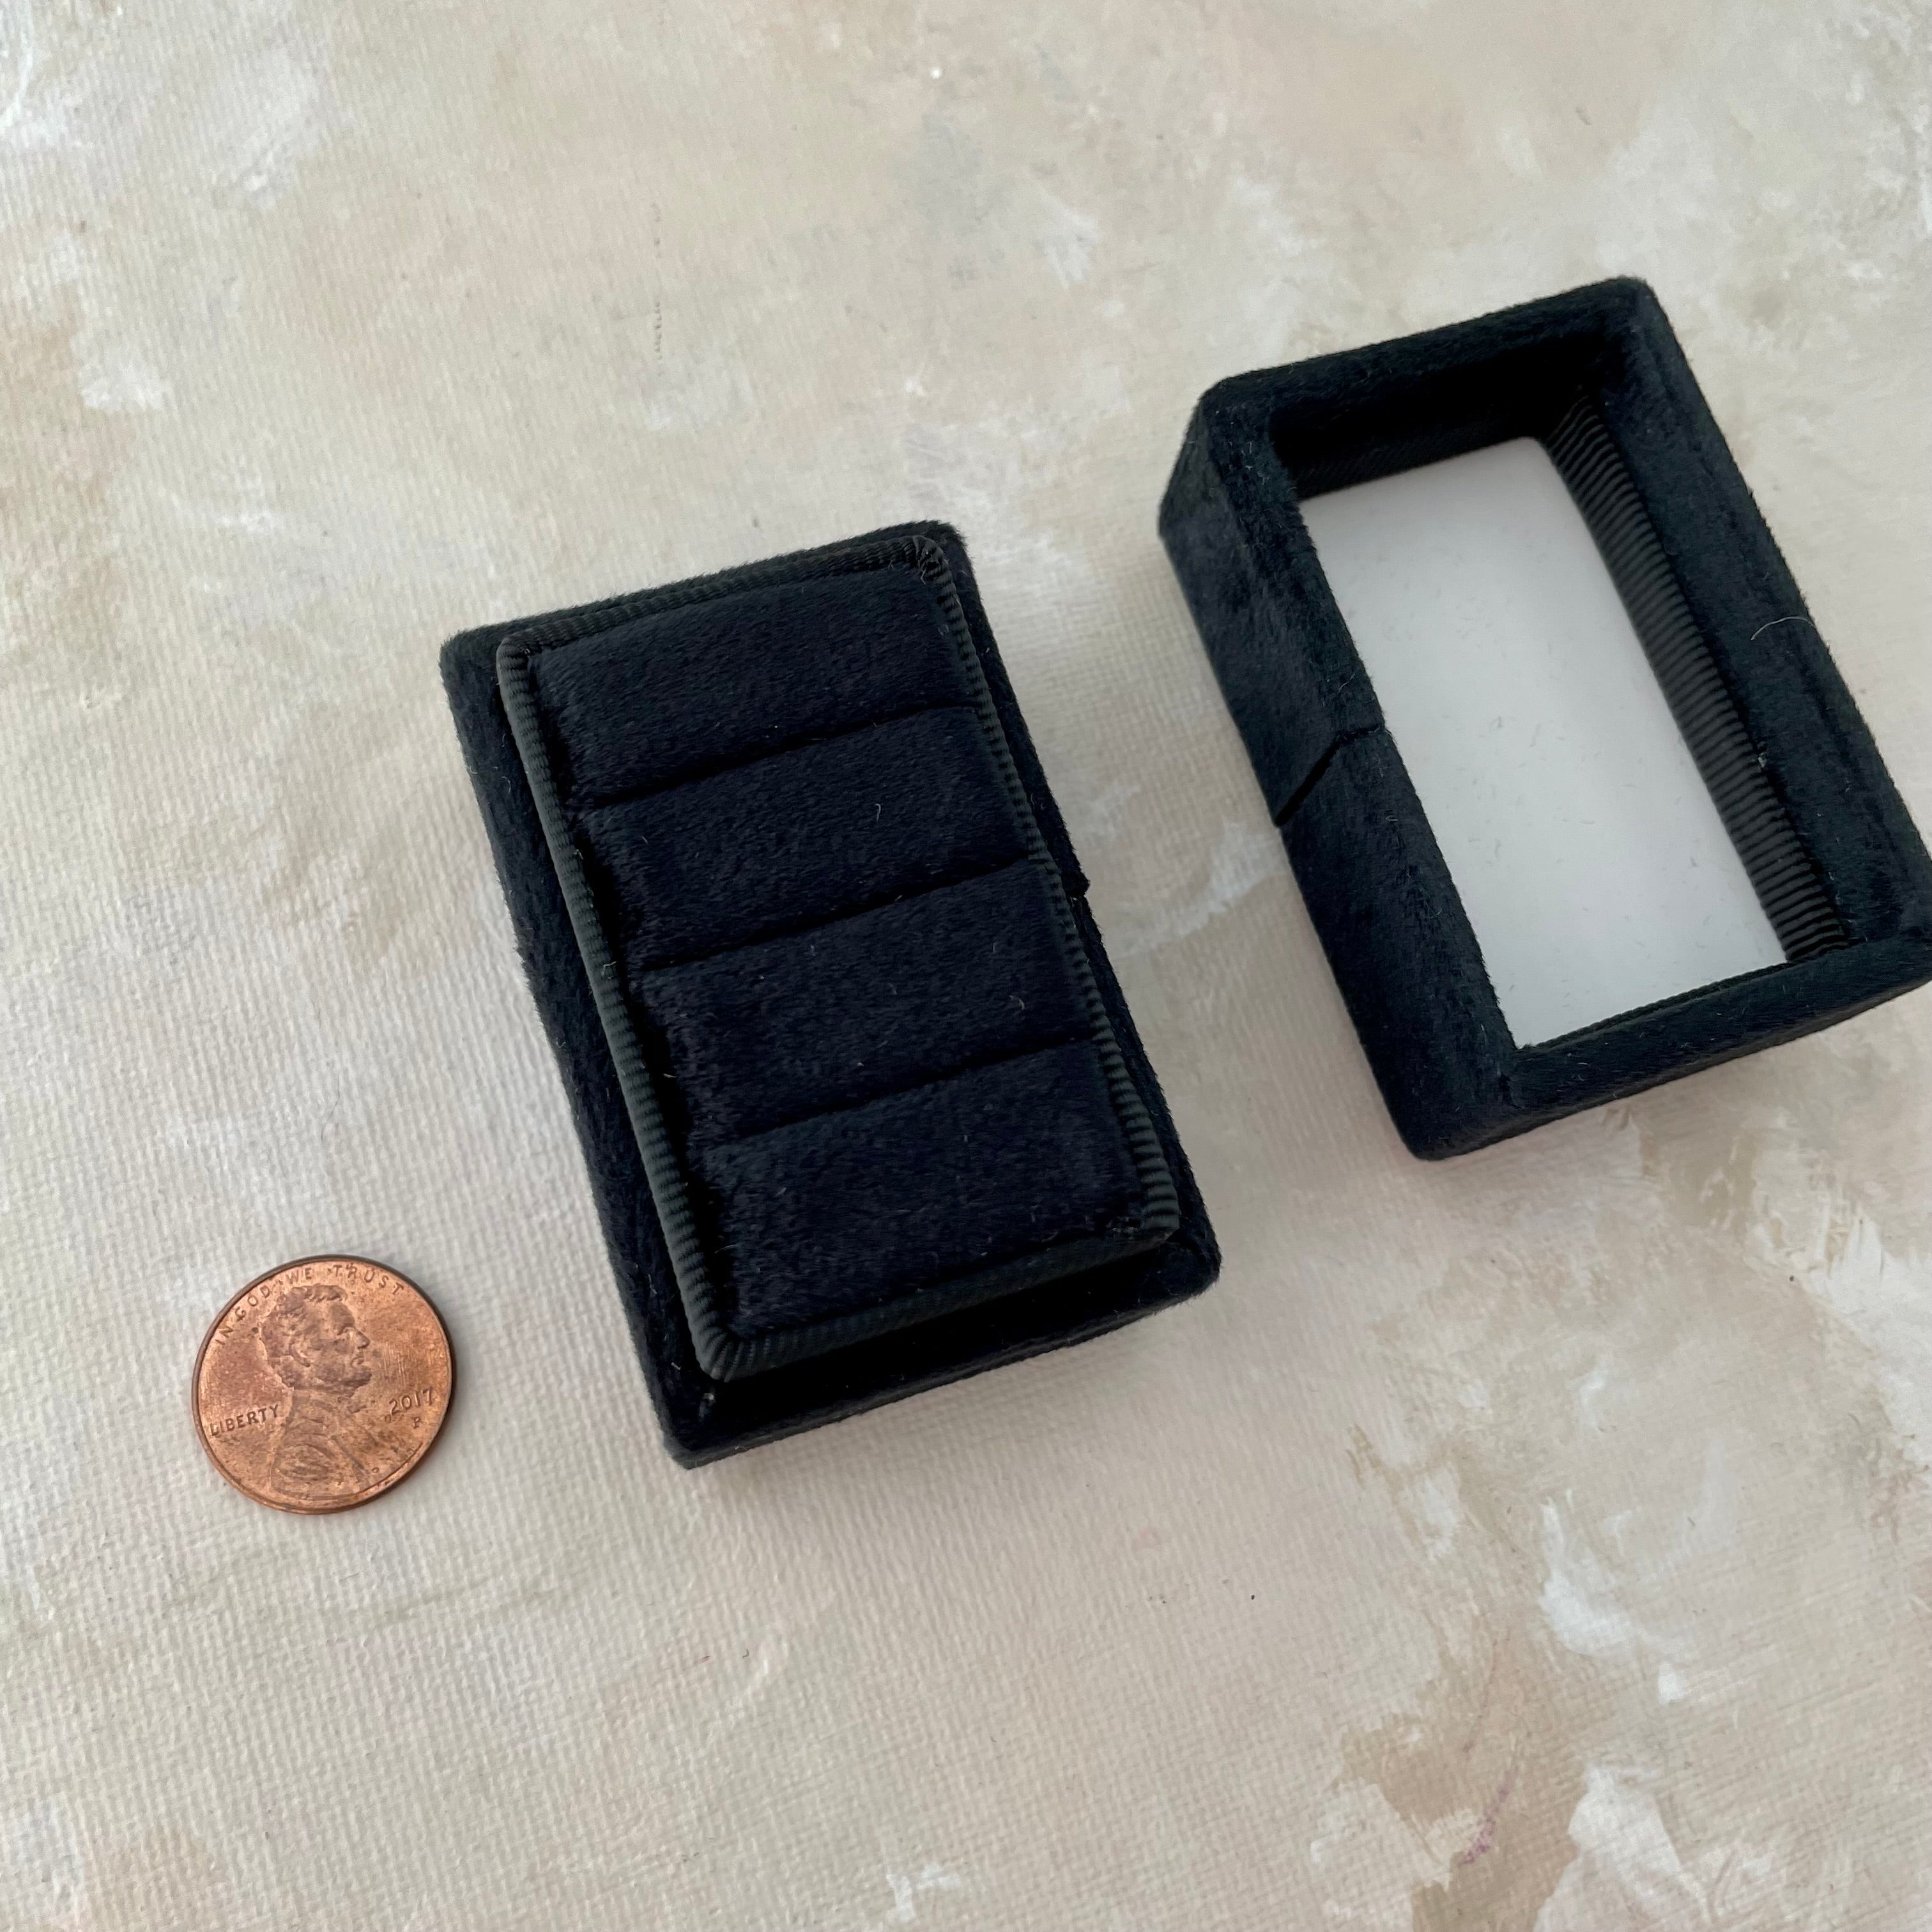 Black triple ring box without rings inside, penny beside for size reference - Flat Lay Props from Champagne & GRIT